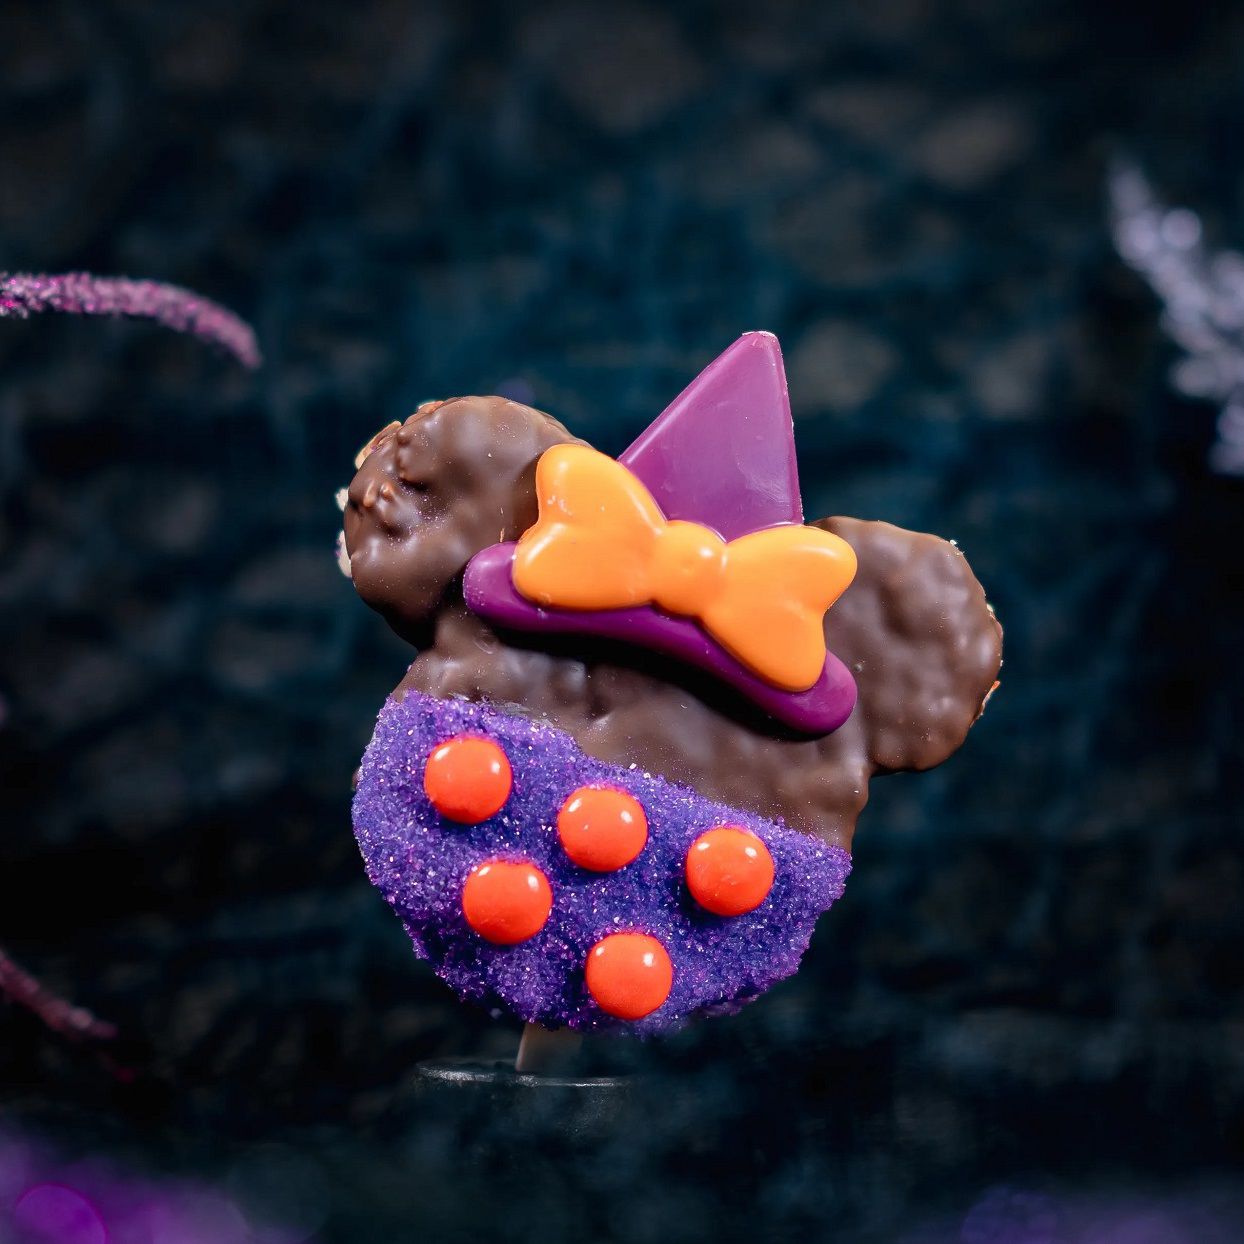 a chocolate covered crispy rice cereal treat cut out in the shape of a Minnie Mouse head wearing a witch's hat and decorated with purple and orange candies to create a Disney Halloween treat